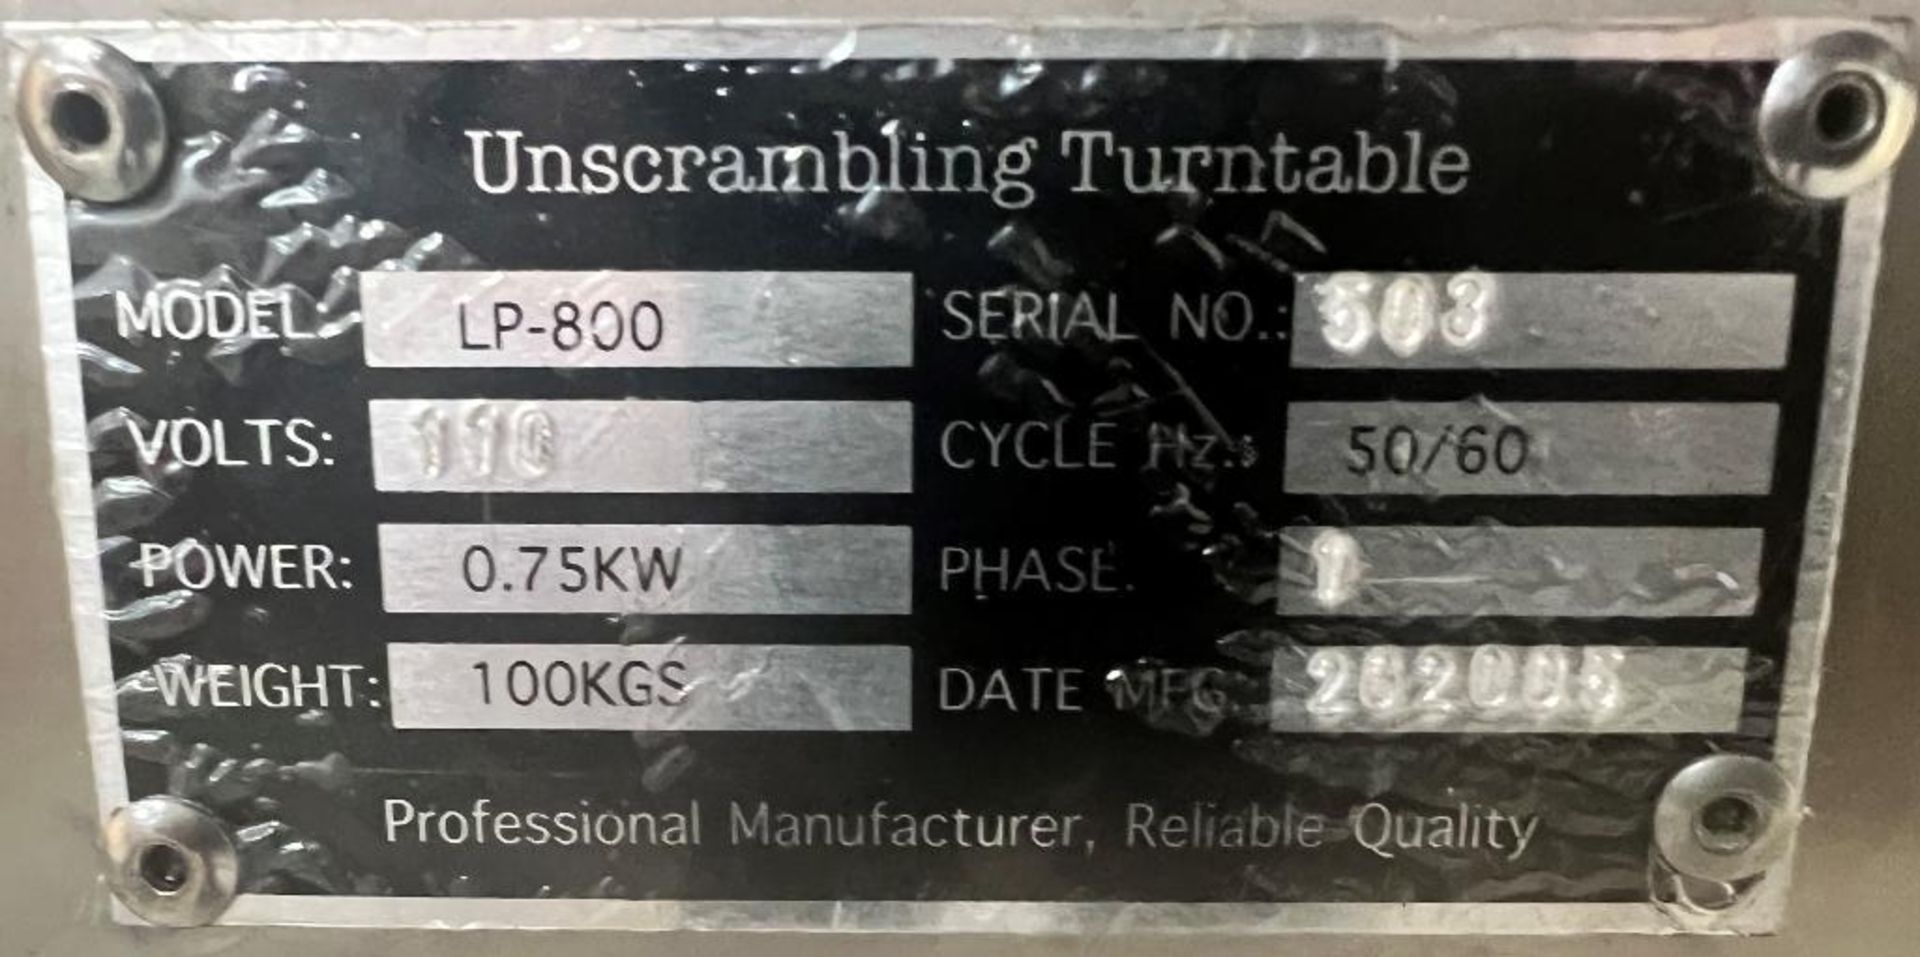 Professional Manufacturer Stainless Steel Unscrambling Table, Model LP-800, Serial# 503. Approximate - Image 4 of 4